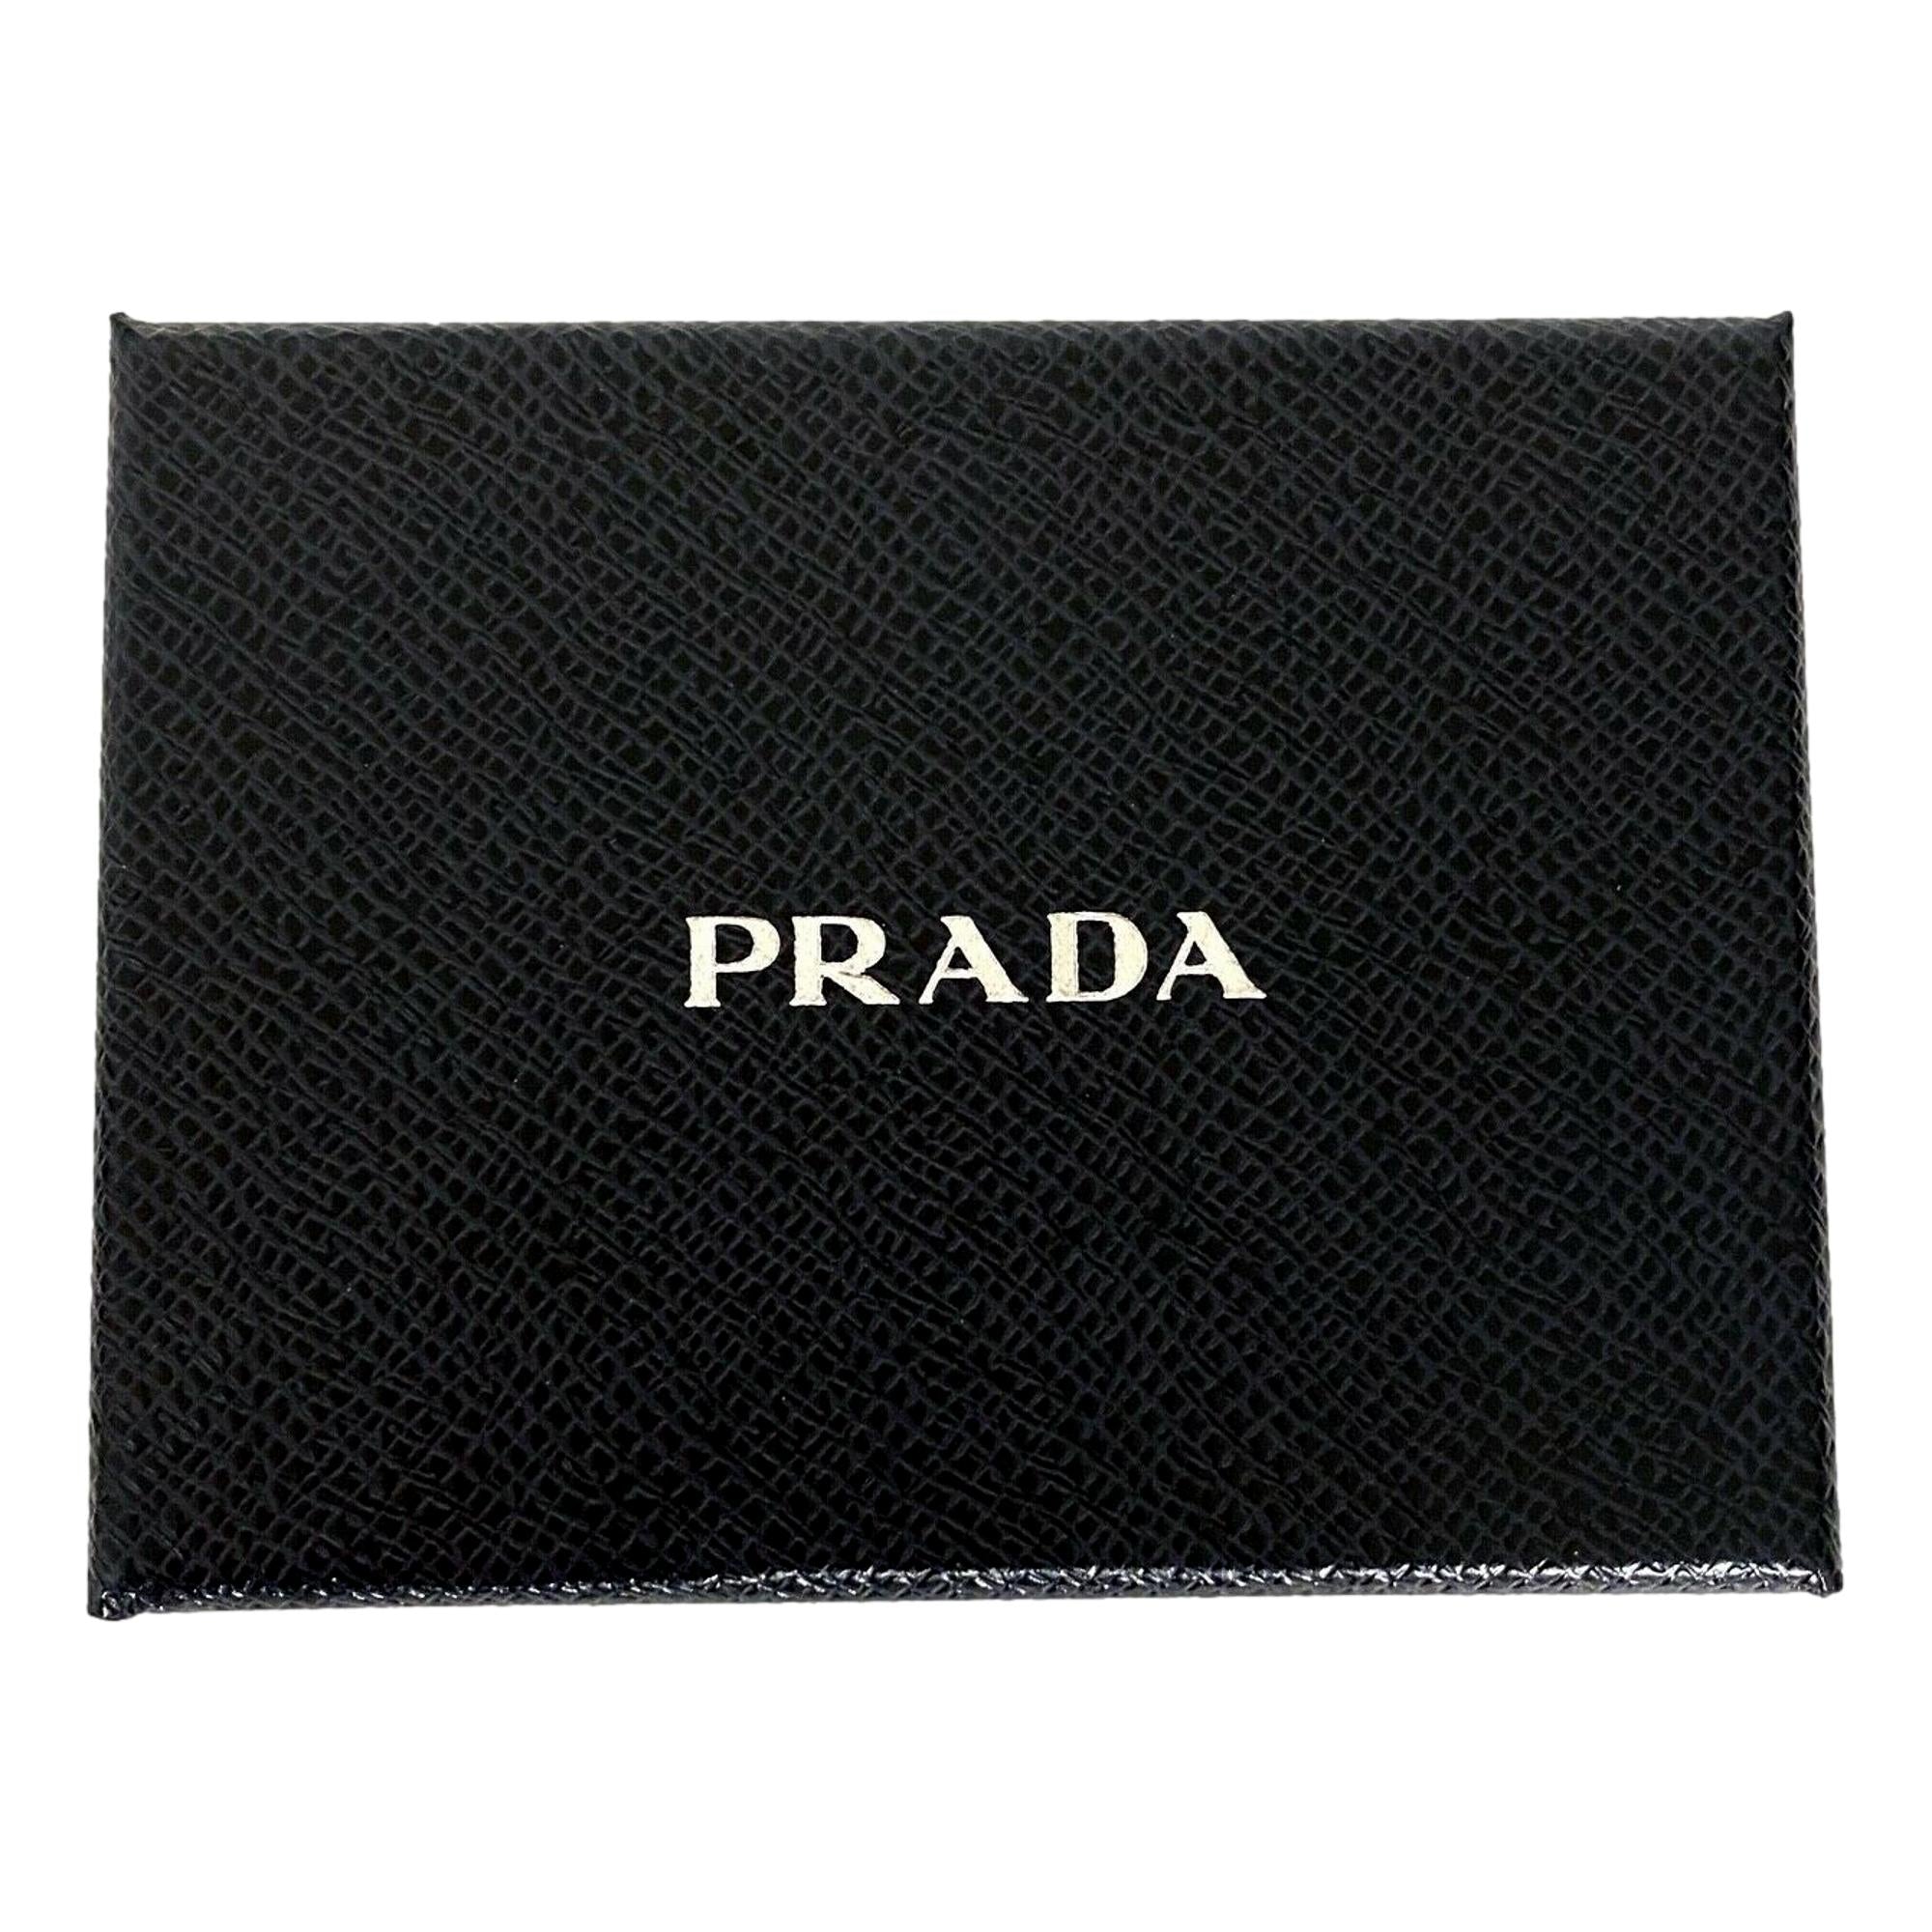 Prada Vitello Micro Grain Leather Black Card Holder Wallet at_Queen_Bee_of_Beverly_Hills